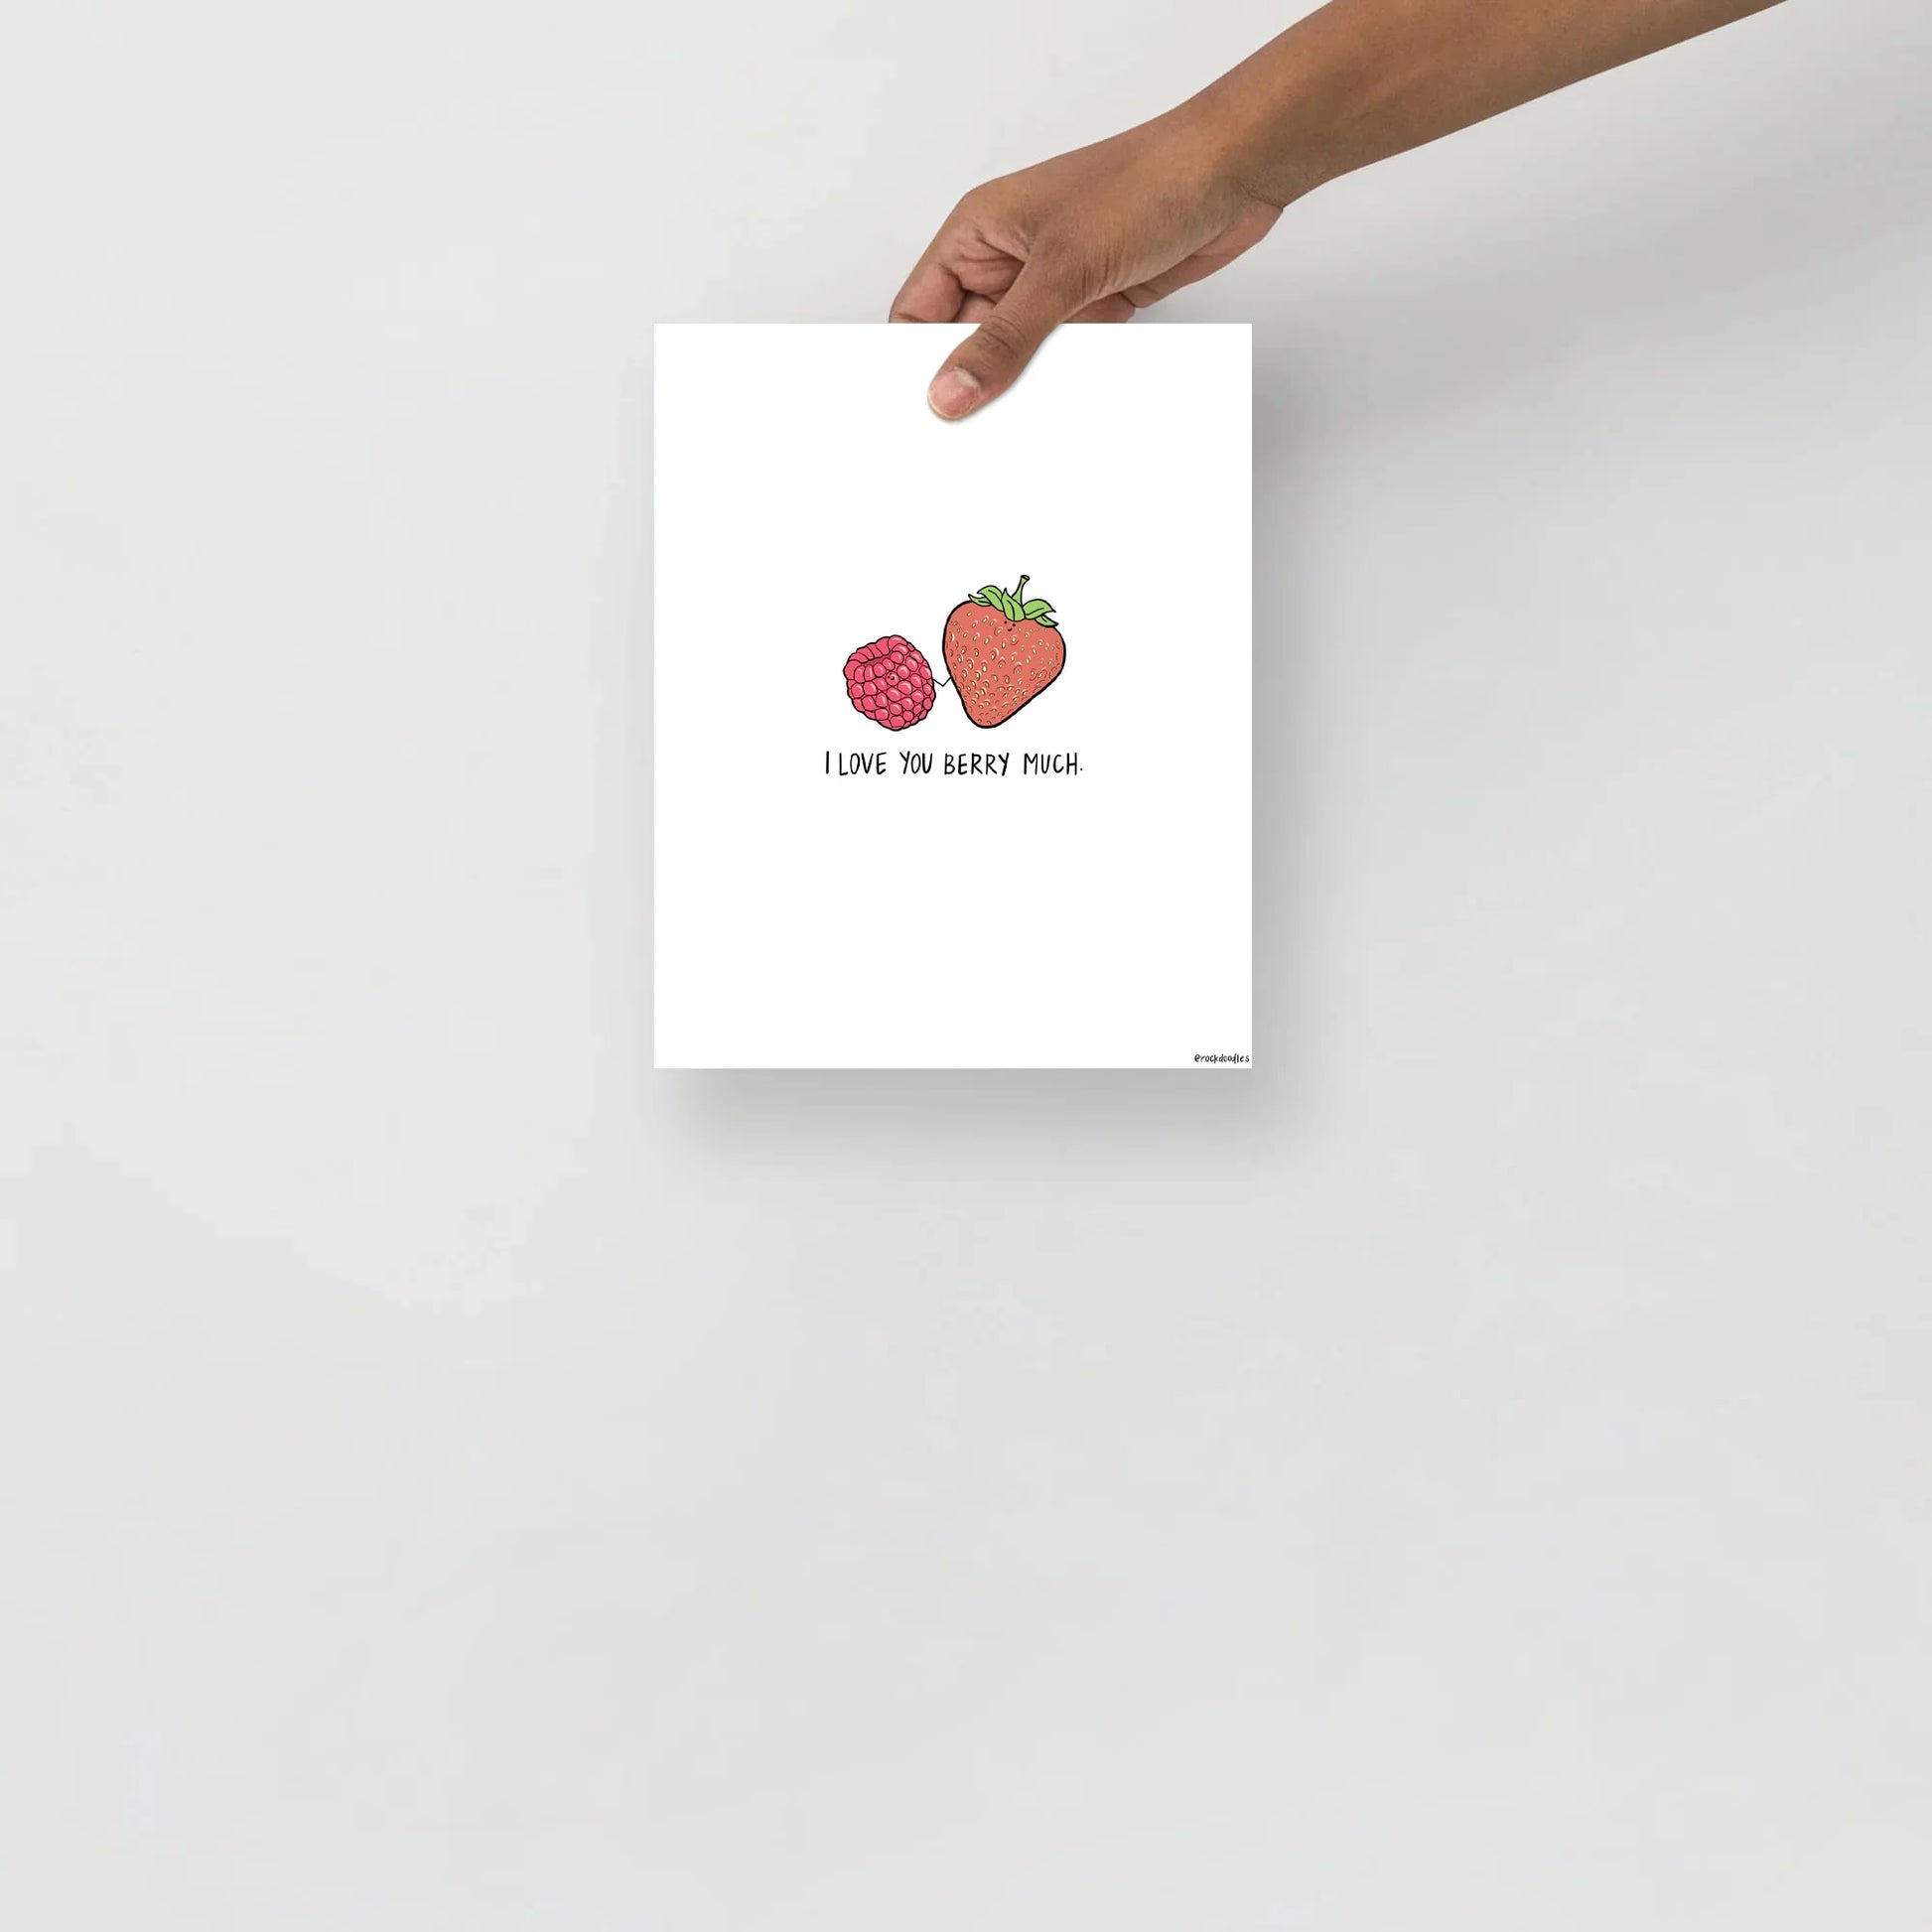 A "Berry Much Print" by rockdoodles, featuring a hand holding up a card with a strawberry on it, displayed in a wood frame.